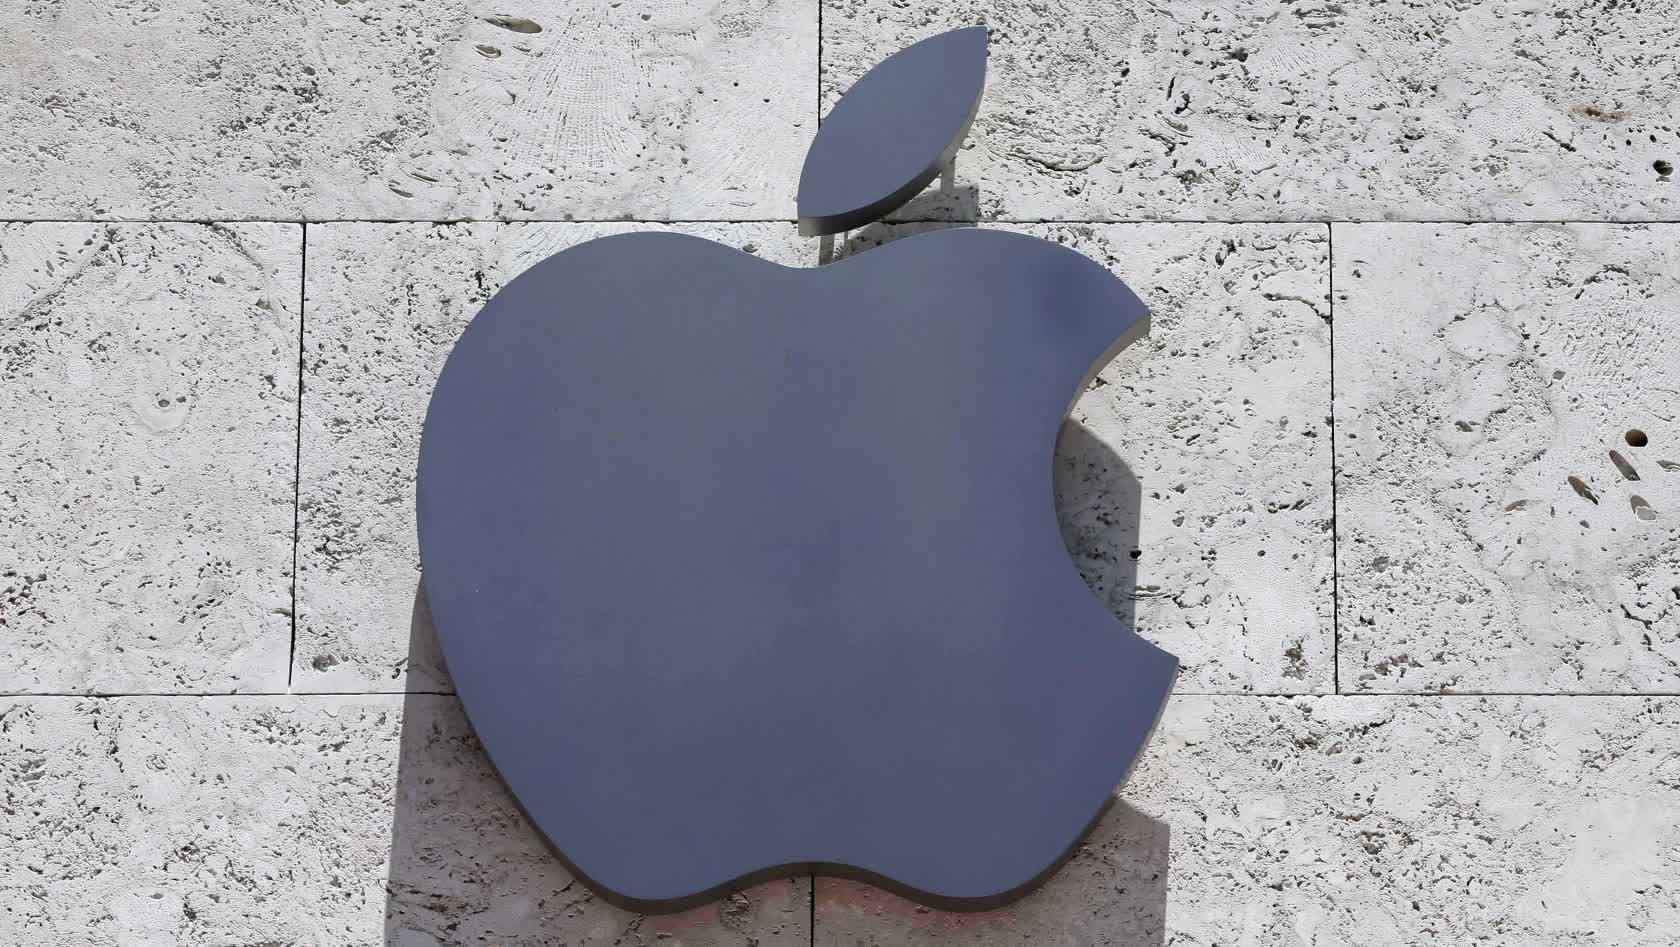 Jury orders Apple to pay VirnetX over $500 million for patent violation